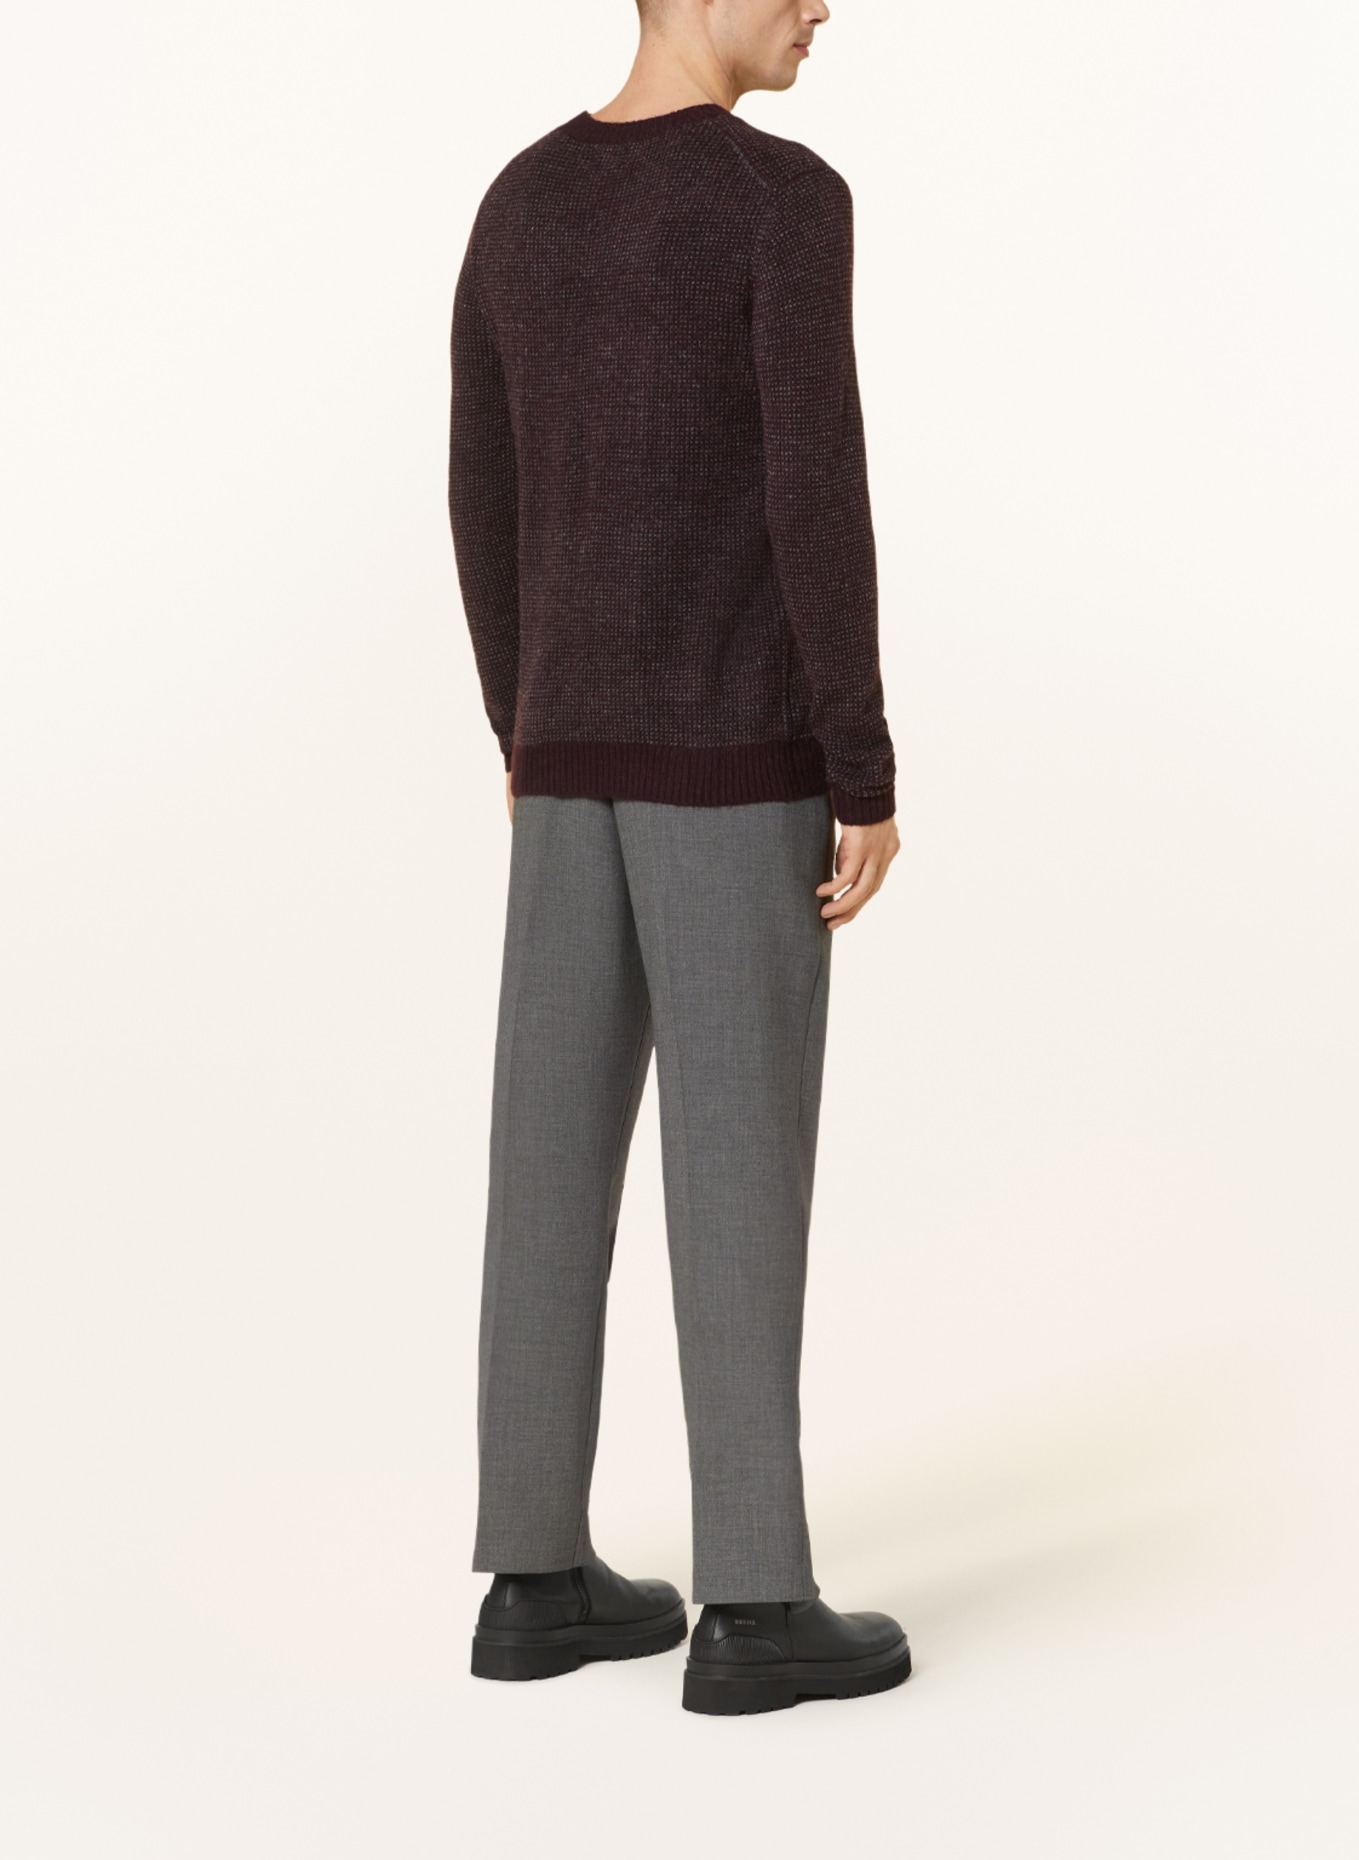 NOWADAYS Sweater, Color: DARK RED/ GRAY (Image 4)